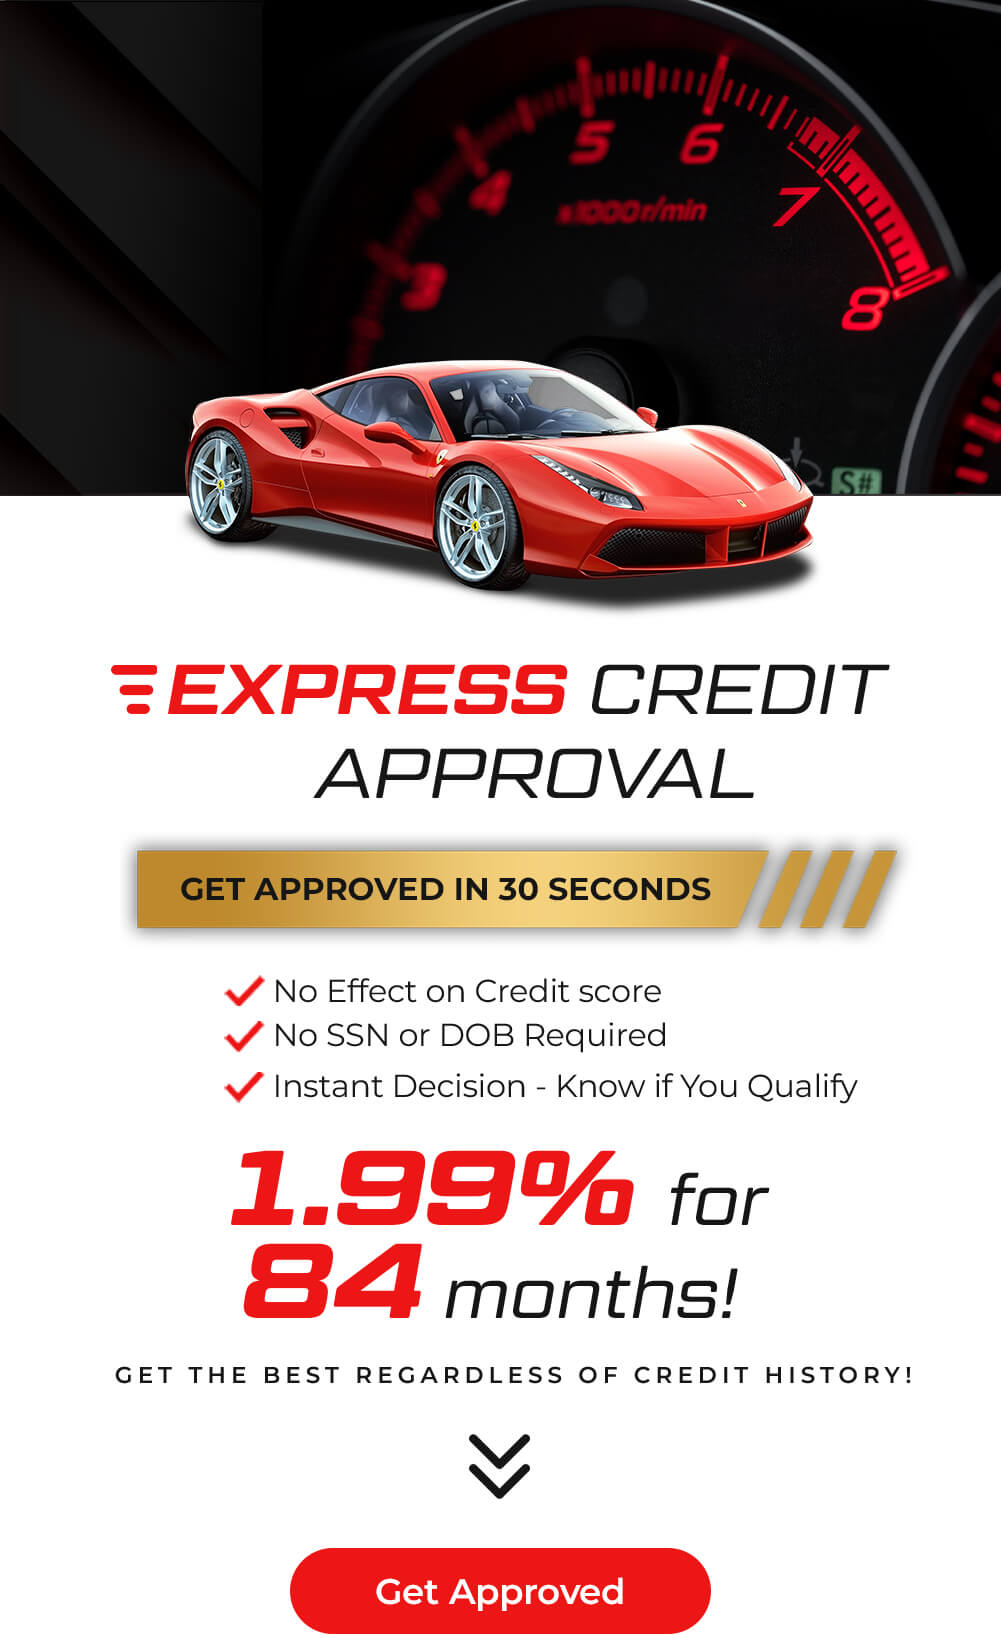 Express credit approval. GEt approved in 30 seconds! 1.99% for 84 months! Get the best regardless of credit history! Get approved.